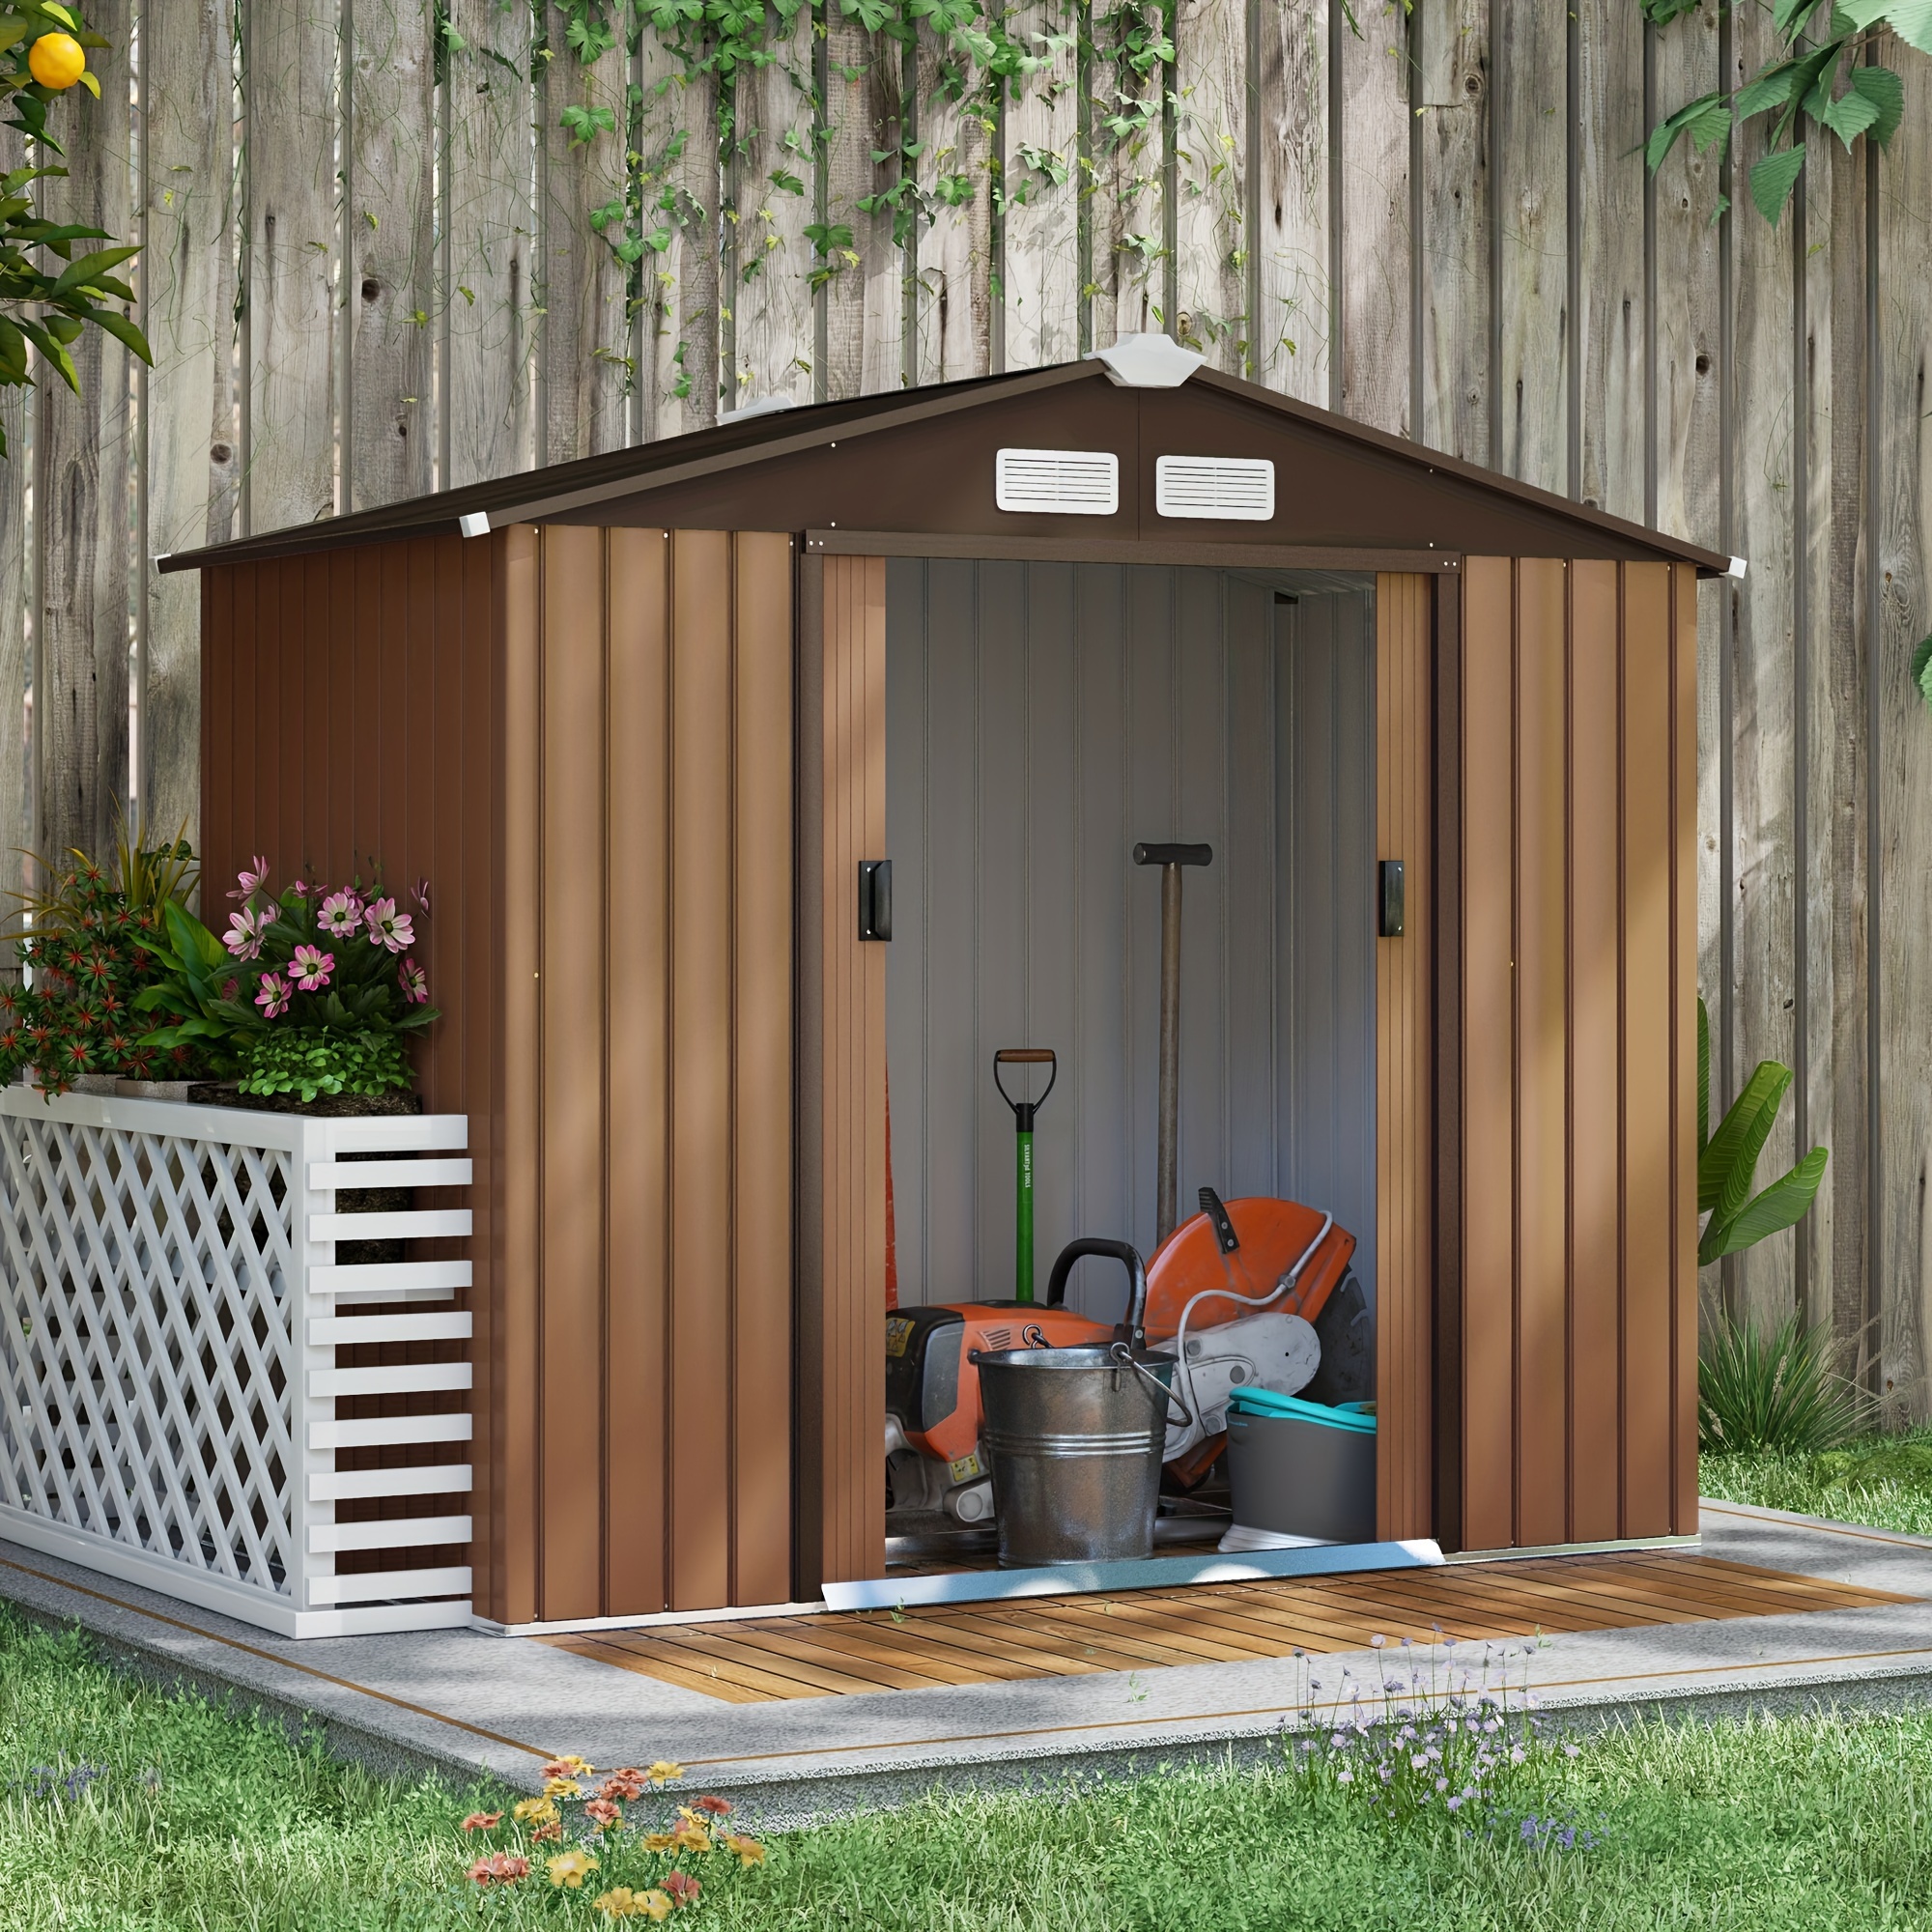 

Outsunny 7' X 4' Outdoor Storage Shed, Garden With Foundation Kit, 4 Vents And Sliding Doors For Backyard, Patio, Garage, Lawn, Yellow